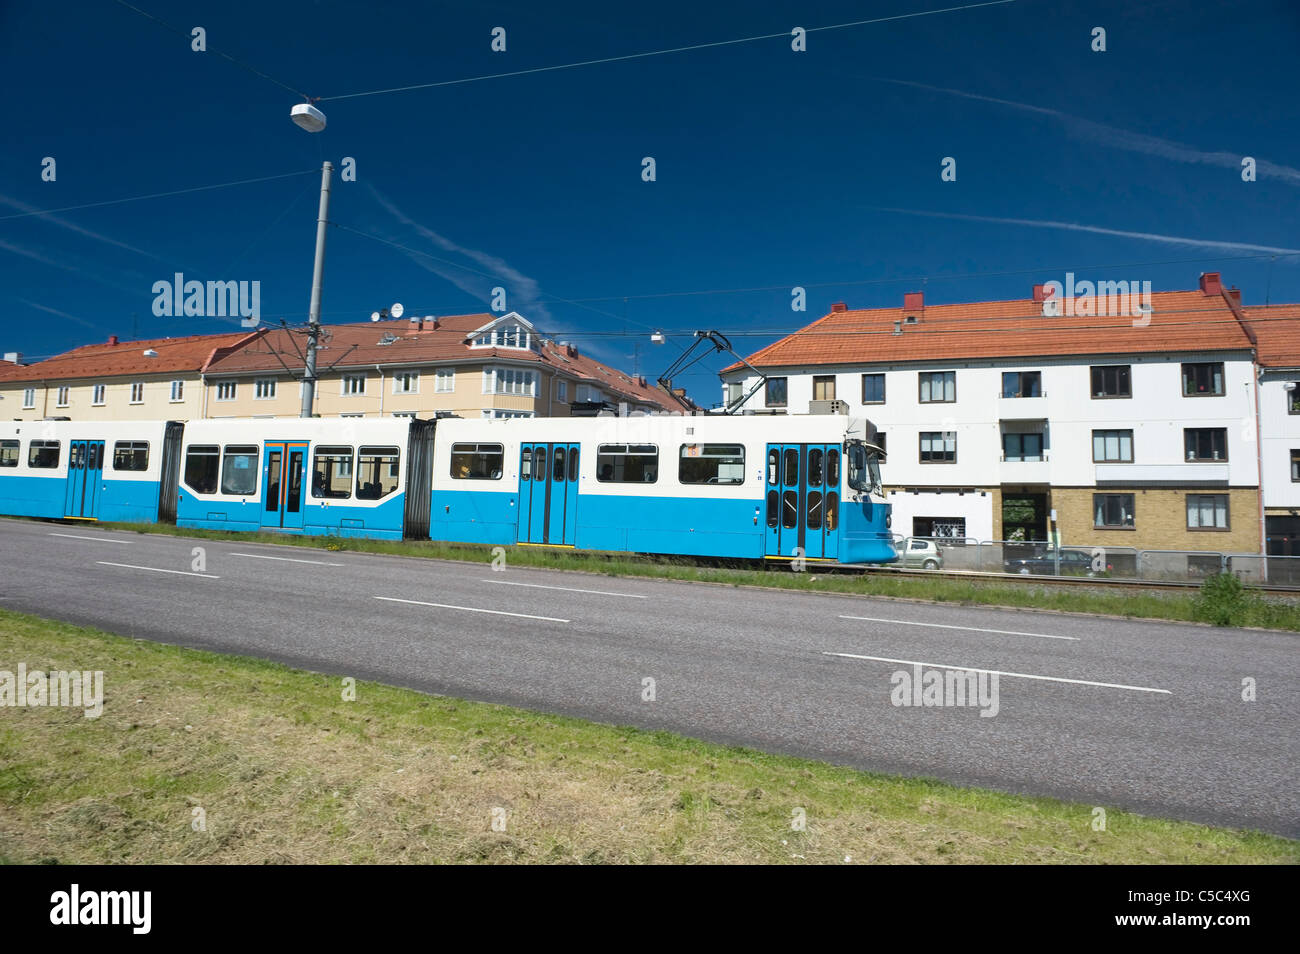 Tram with apartments against blue sky in the background at Gothenburg, Sweden Stock Photo